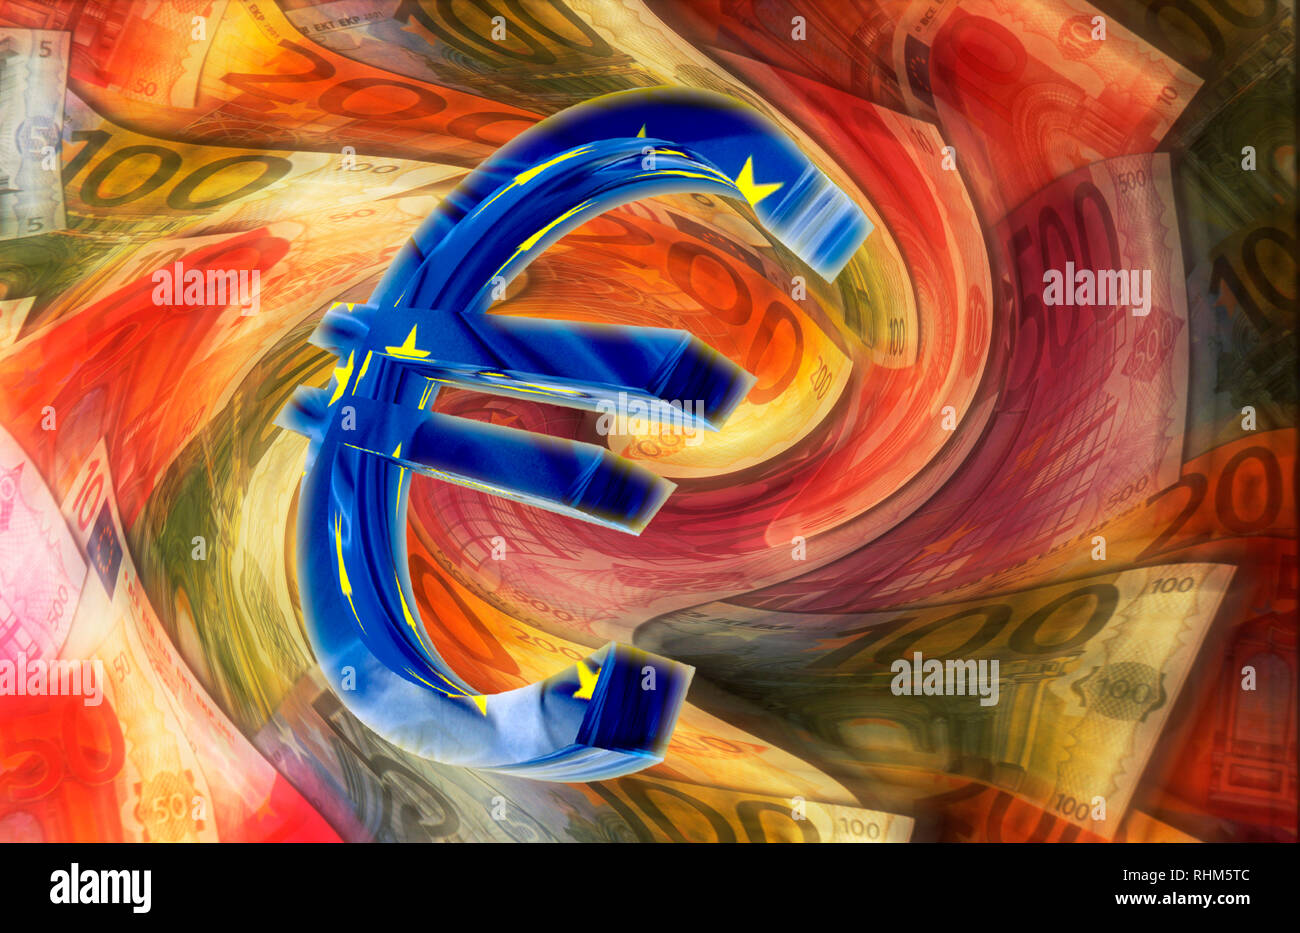 Euro sign in front of blurred euro banknotes, illustration Stock Photo